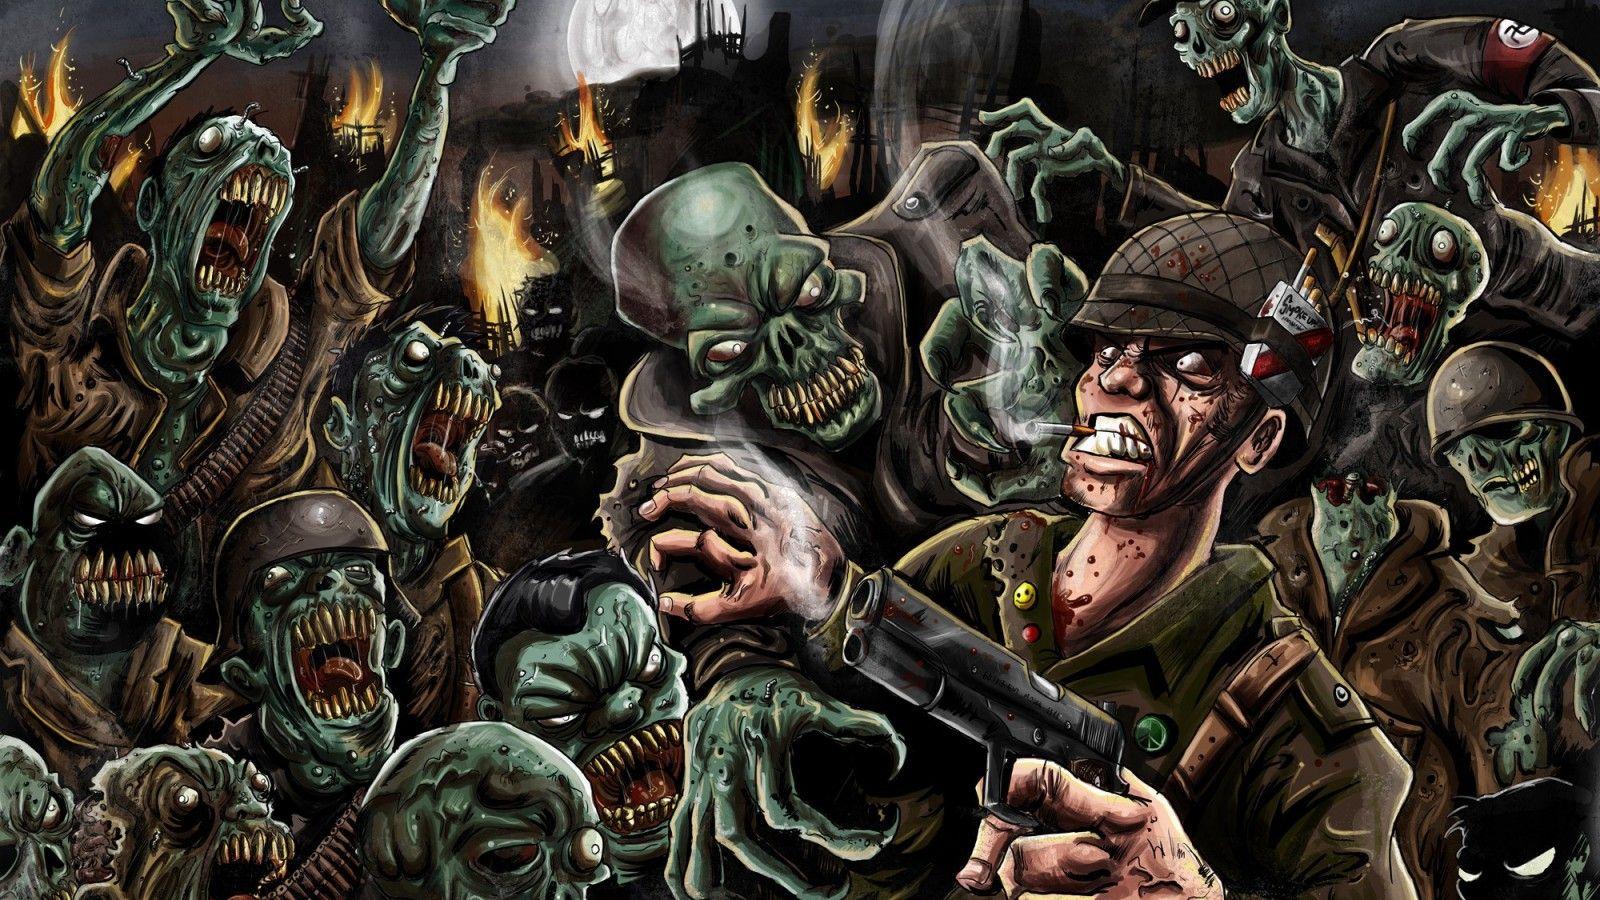 Call Of Duty WW2 Zombies Wallpapers - Wallpaper Cave